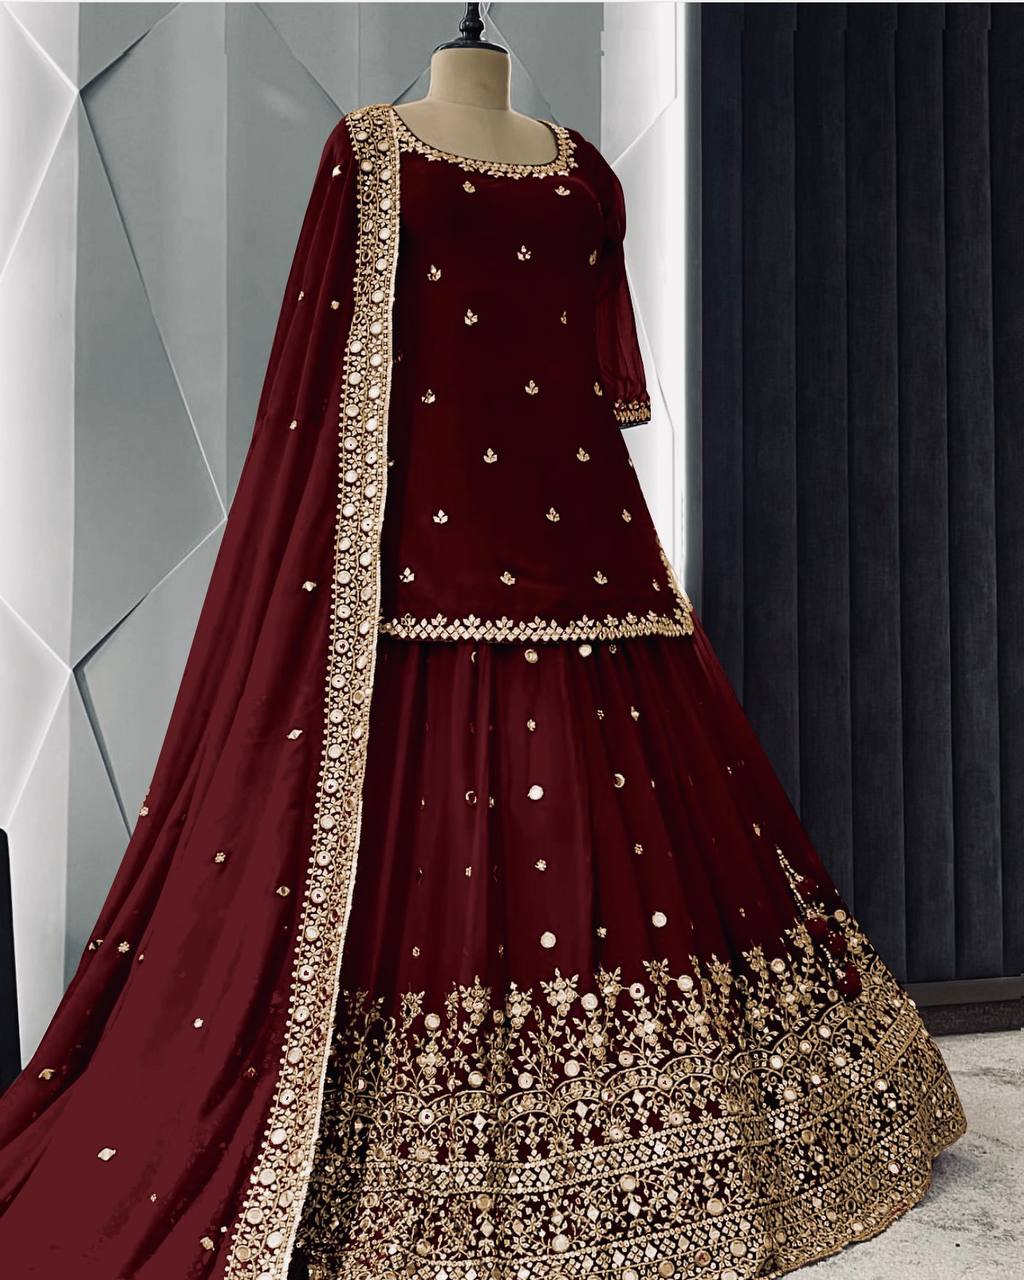 Marvelous Embroidery Work Maroon Color Lehenga With Top